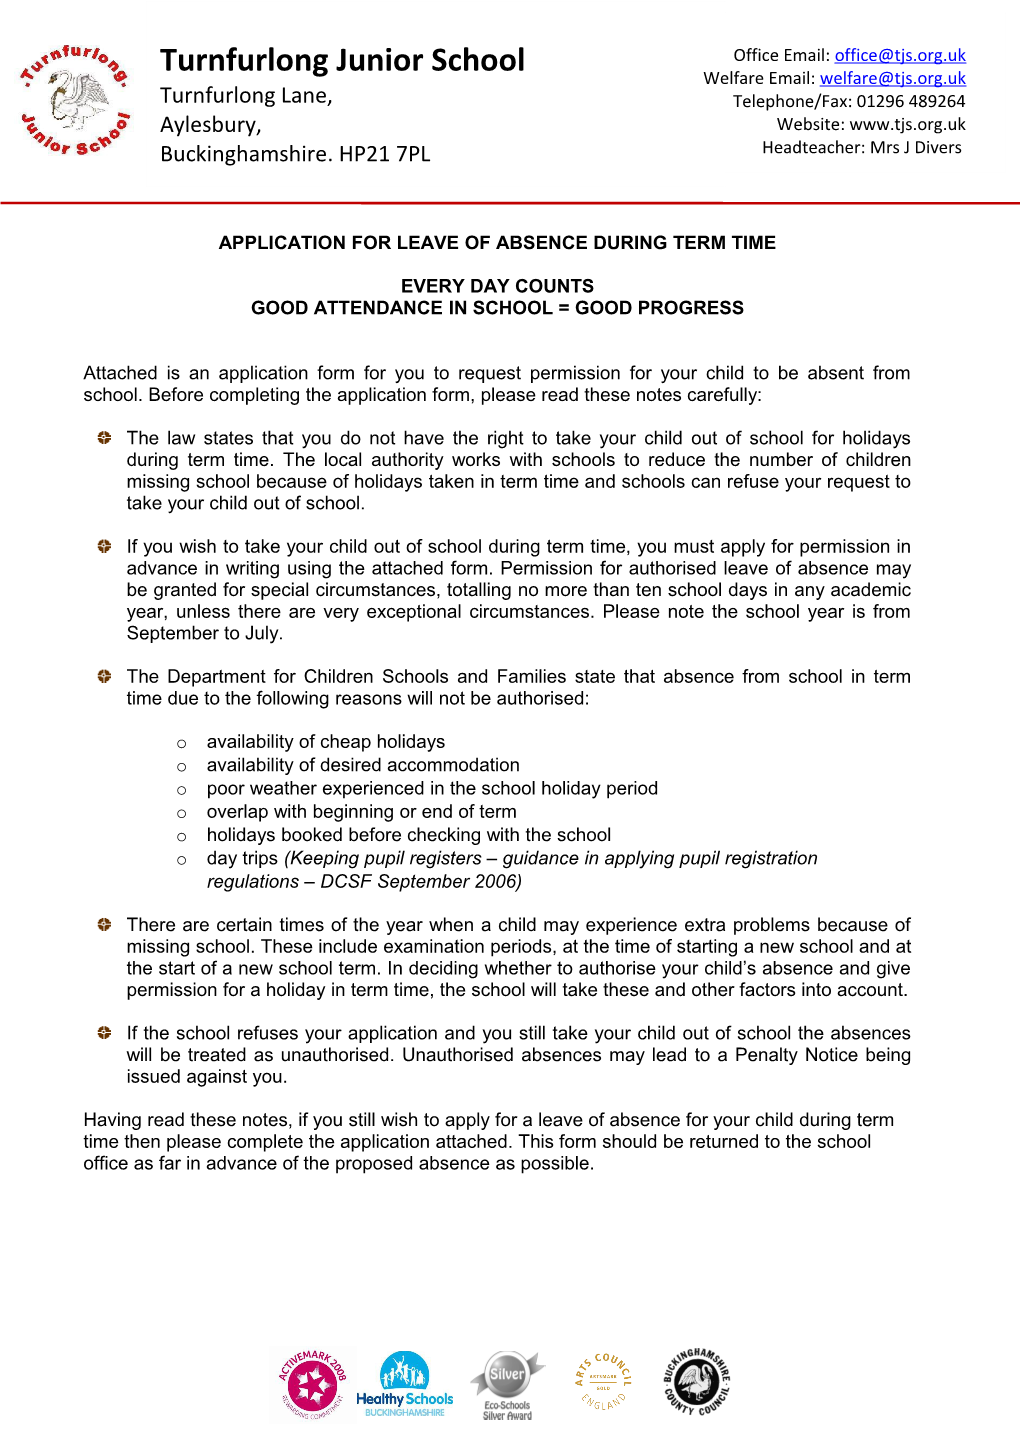 Application for Leave of Absence During Term Time